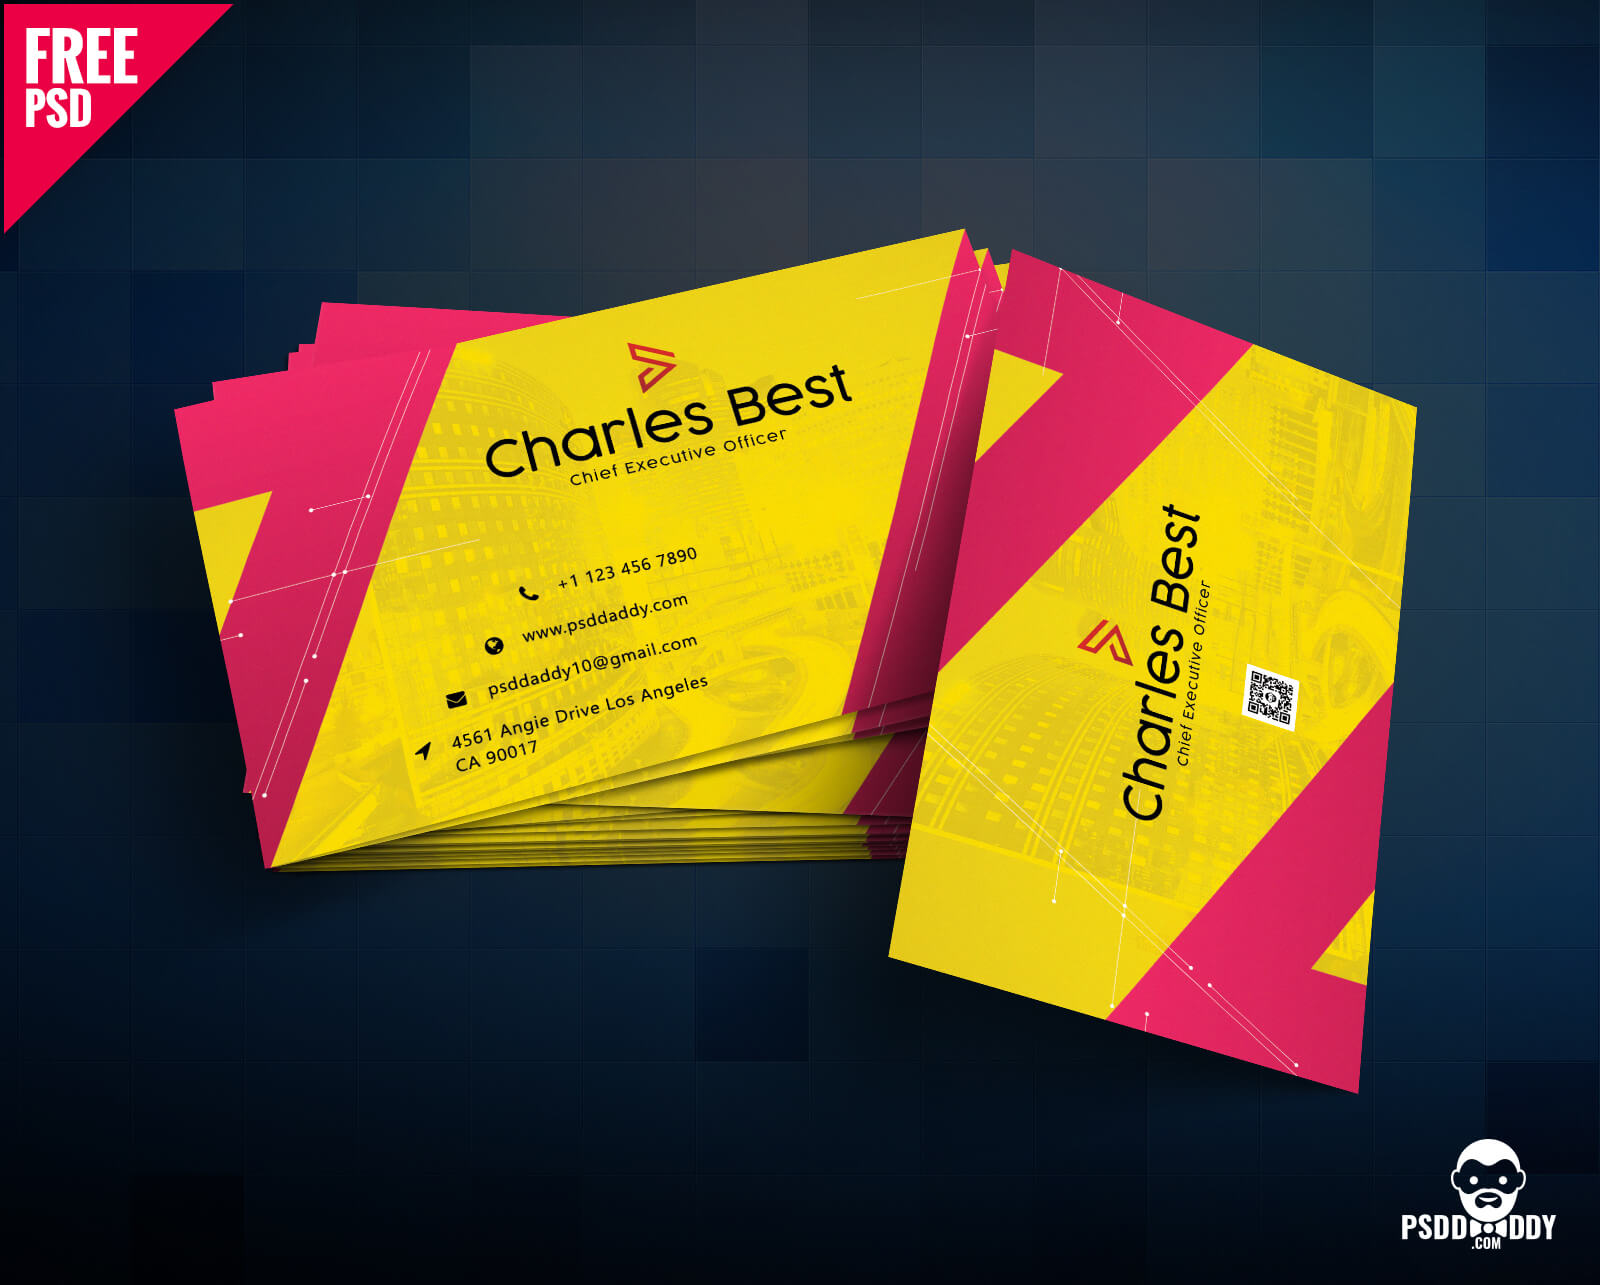 Download] Creative Business Card Free Psd | Psddaddy Within Visiting Card Templates Download